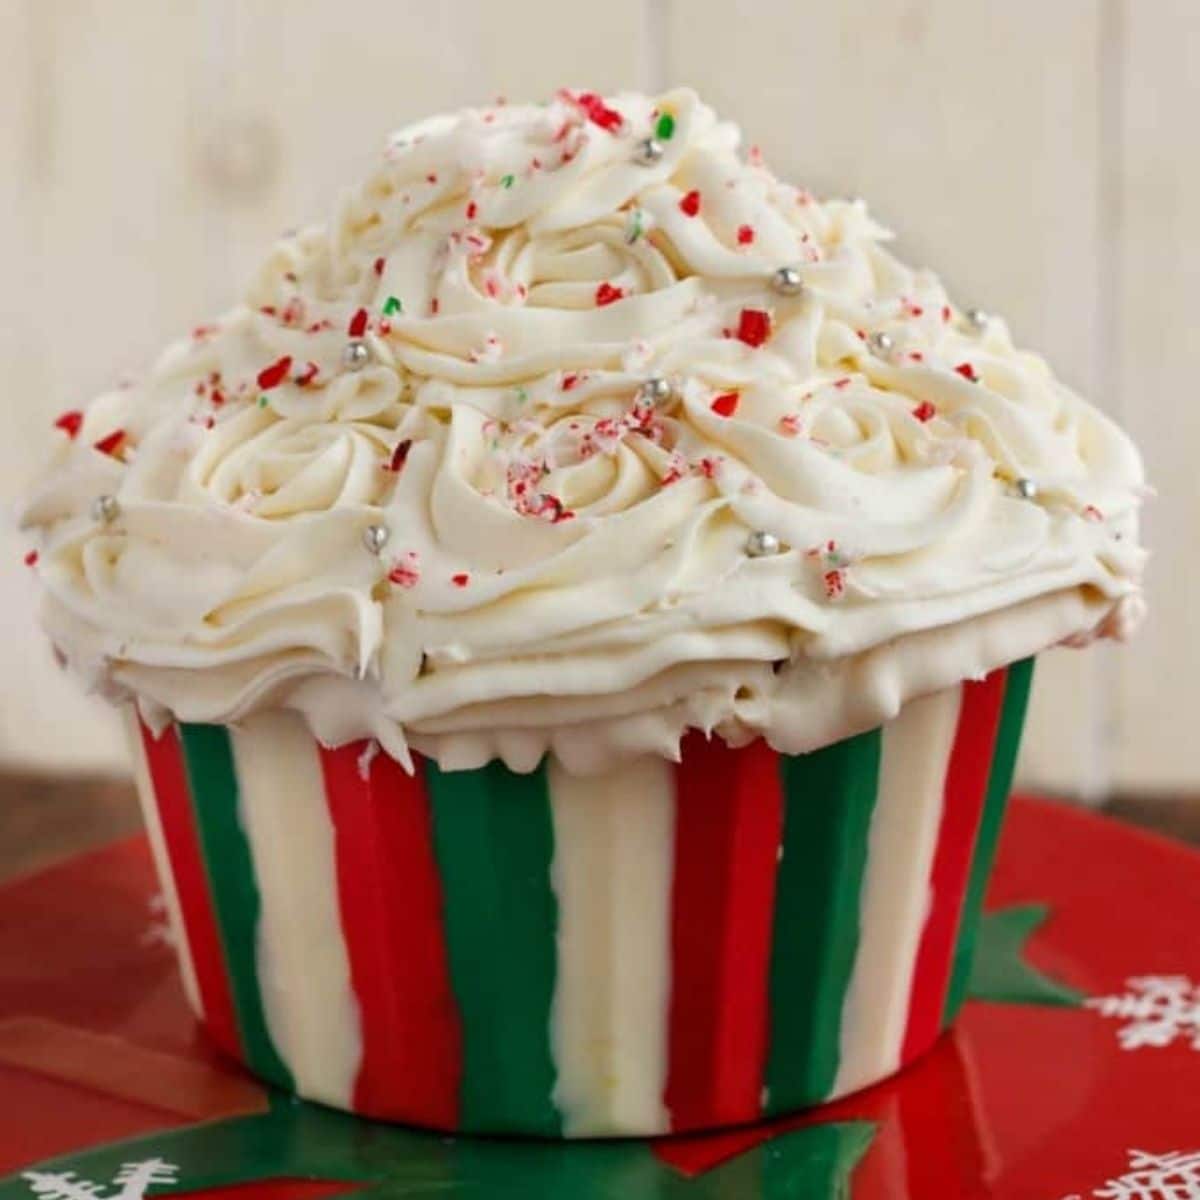 https://thecookiewriter.com/wp-content/uploads/2015/12/festive-giant-cupcake-for-christmas-featured.jpg